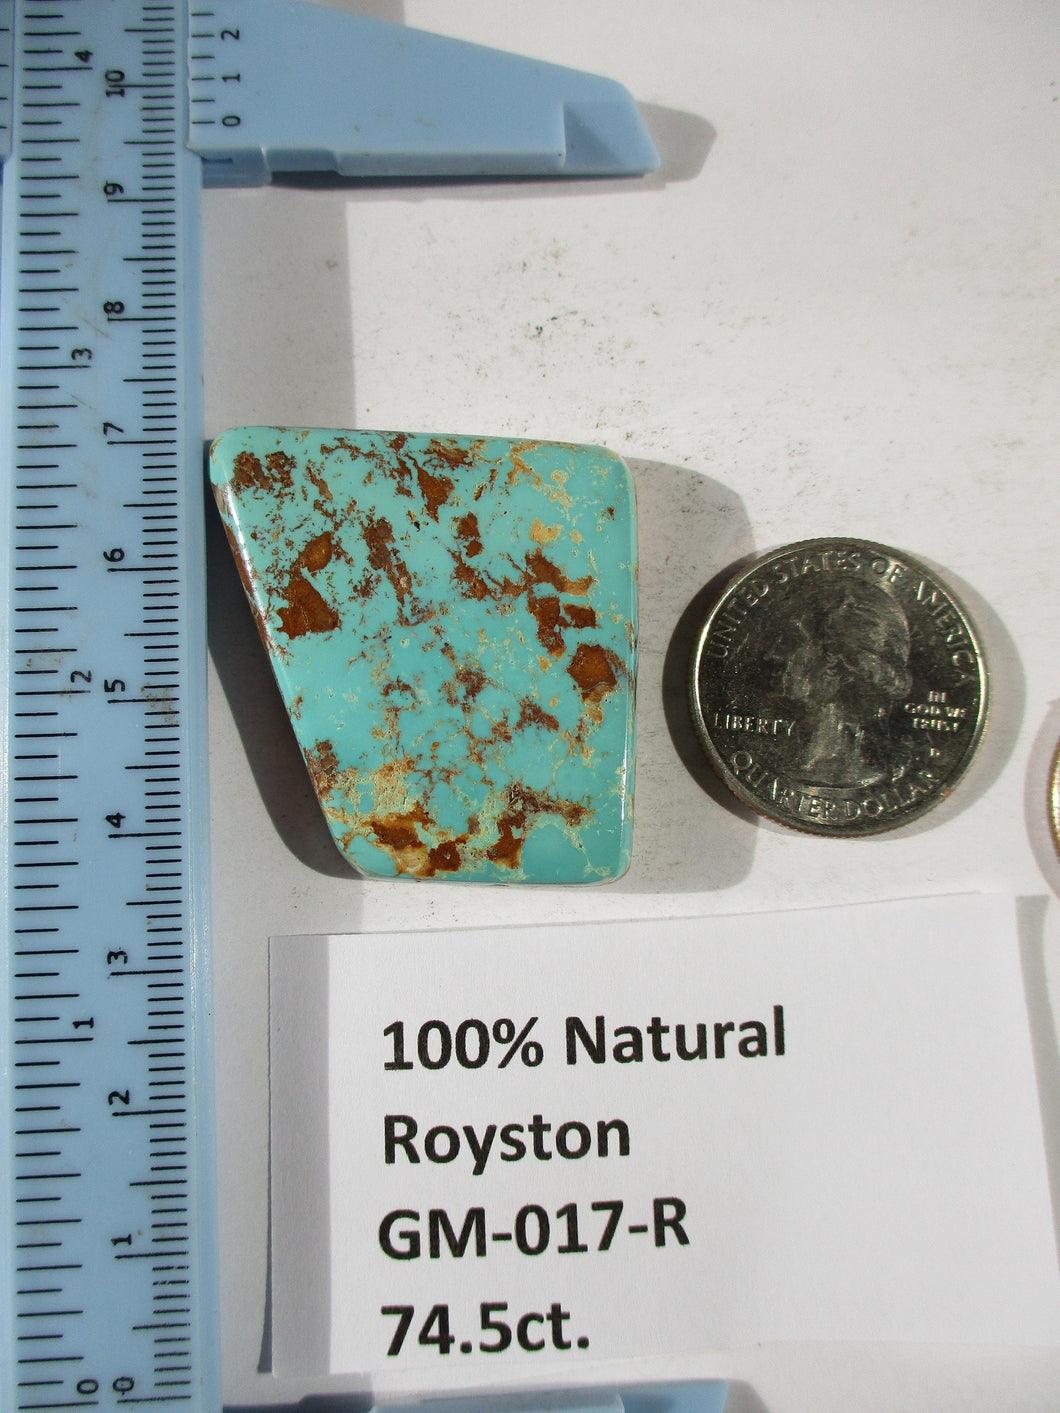 74.5 ct. (36x34x7 mm) 100% Natural Royston Turquoise Cabochon Gemstone, GM 017